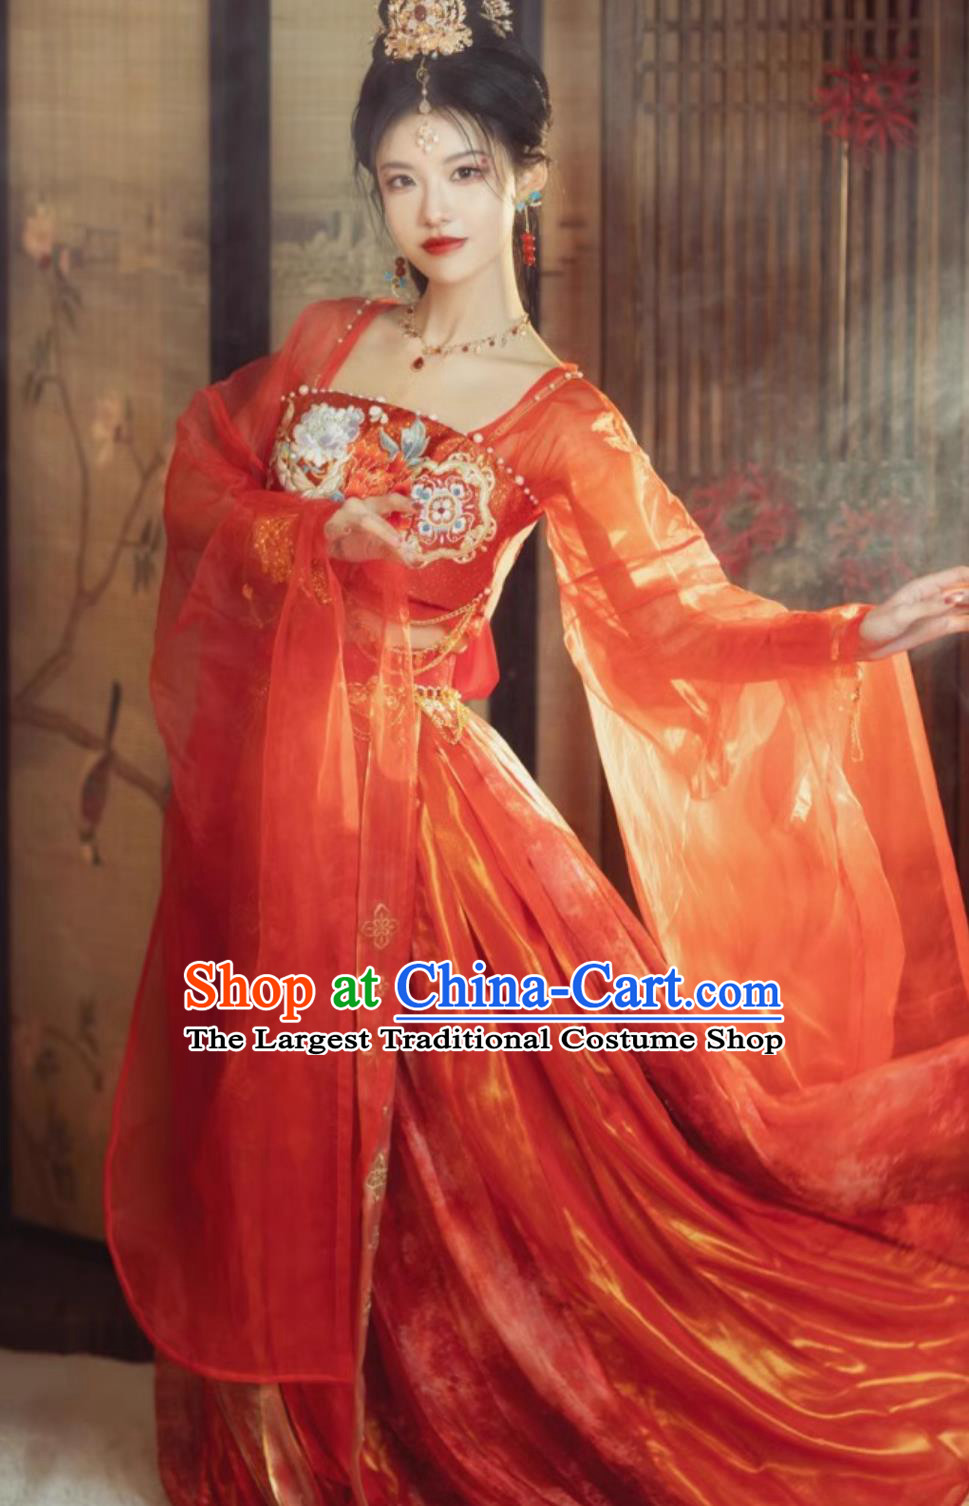 Traditional Ancient Western Regions Dance Lady Red Dresses Chinese Ethnic Princess Costume Hanfu Clothing Online Shop